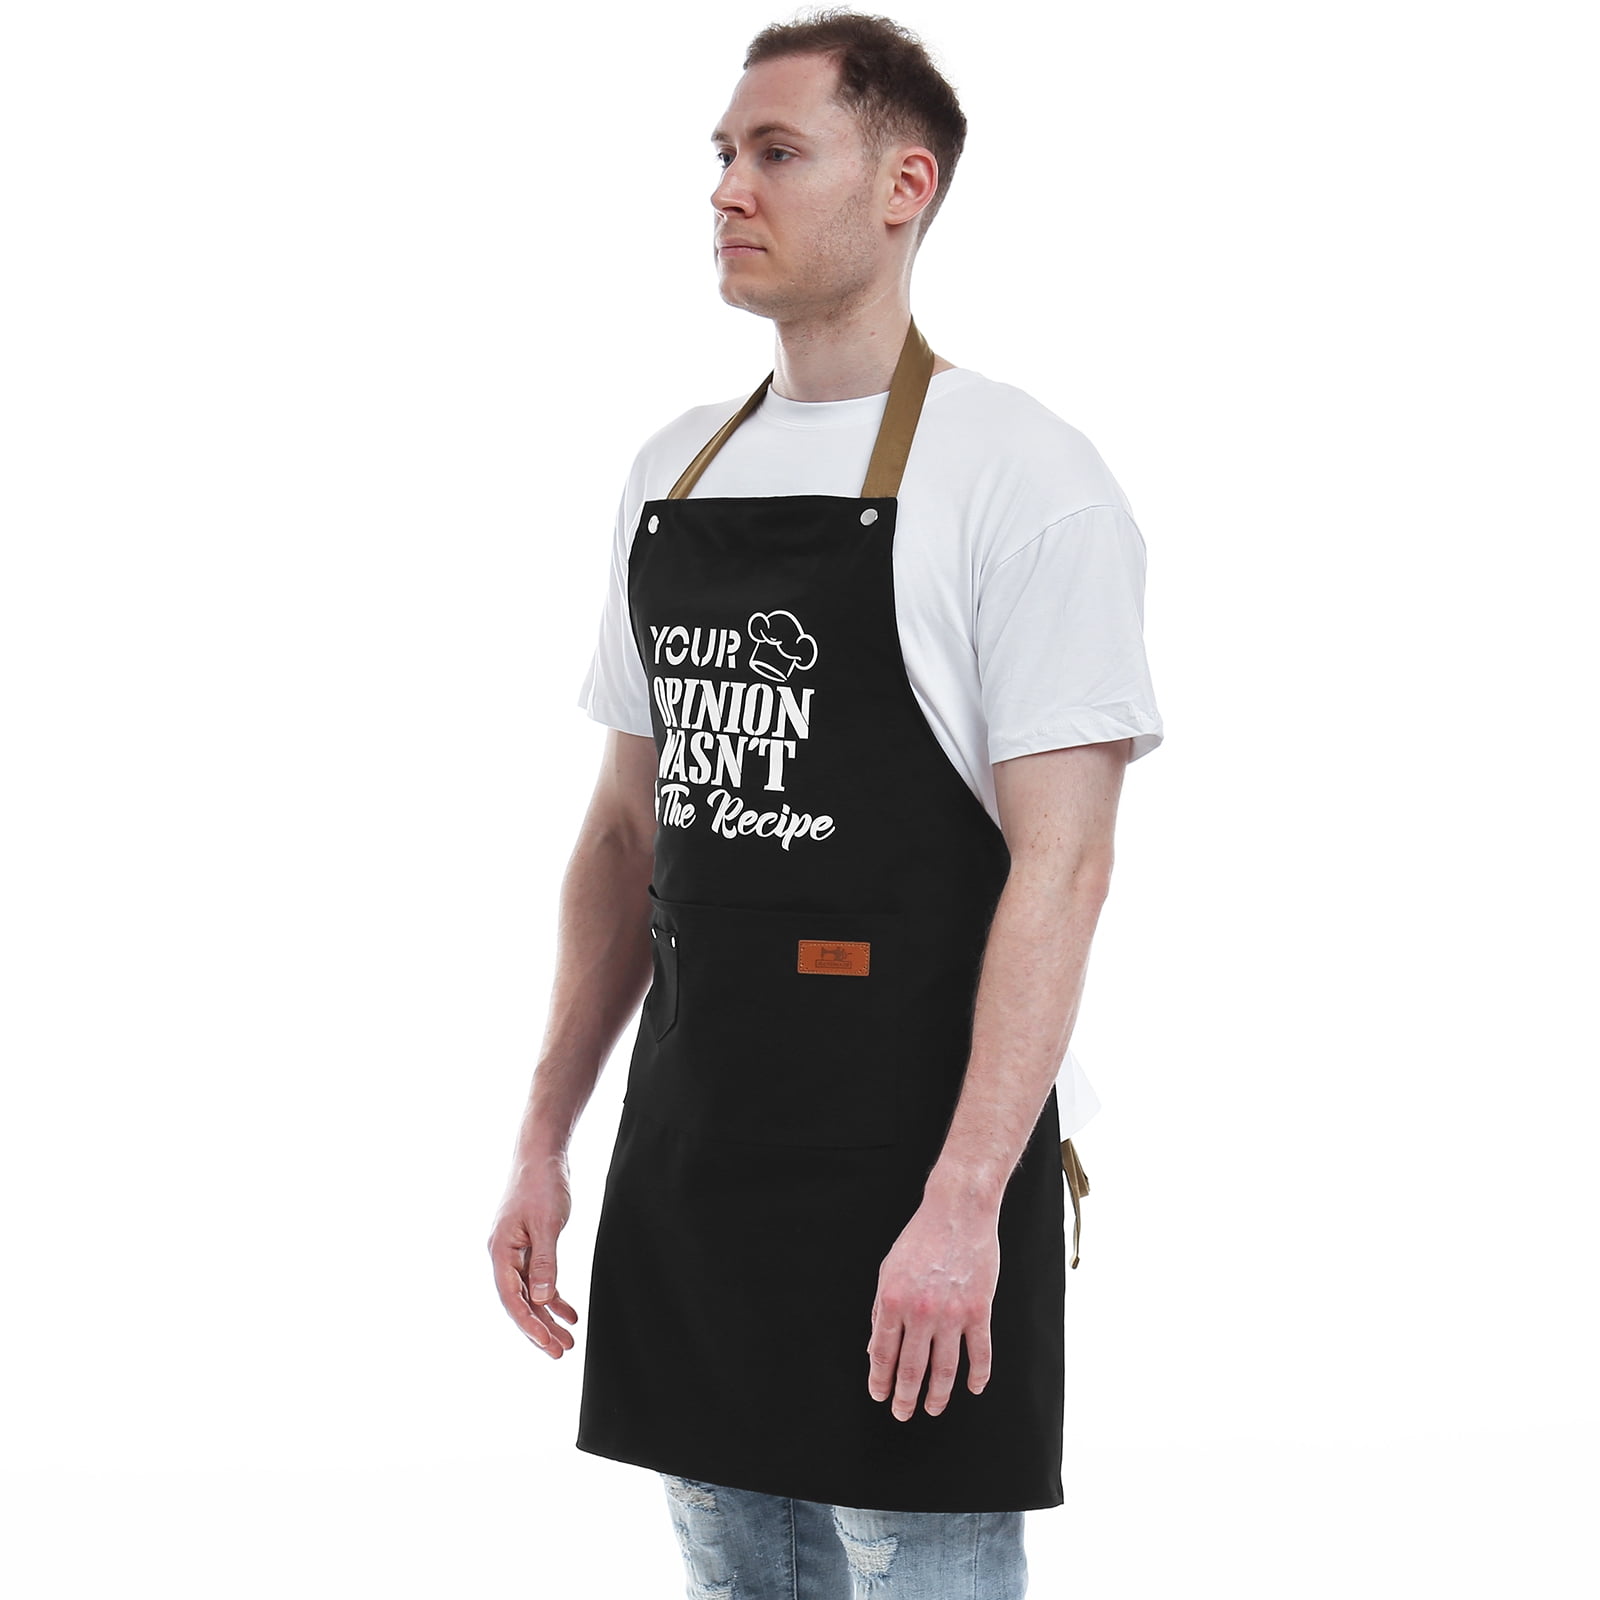 Funny Aprons for Women with 2 Pockets, Queen of the Kitchen Apron for Cooking  Chef Baking, Gifts for Mom Wife Friends Birthday Mothers Day 